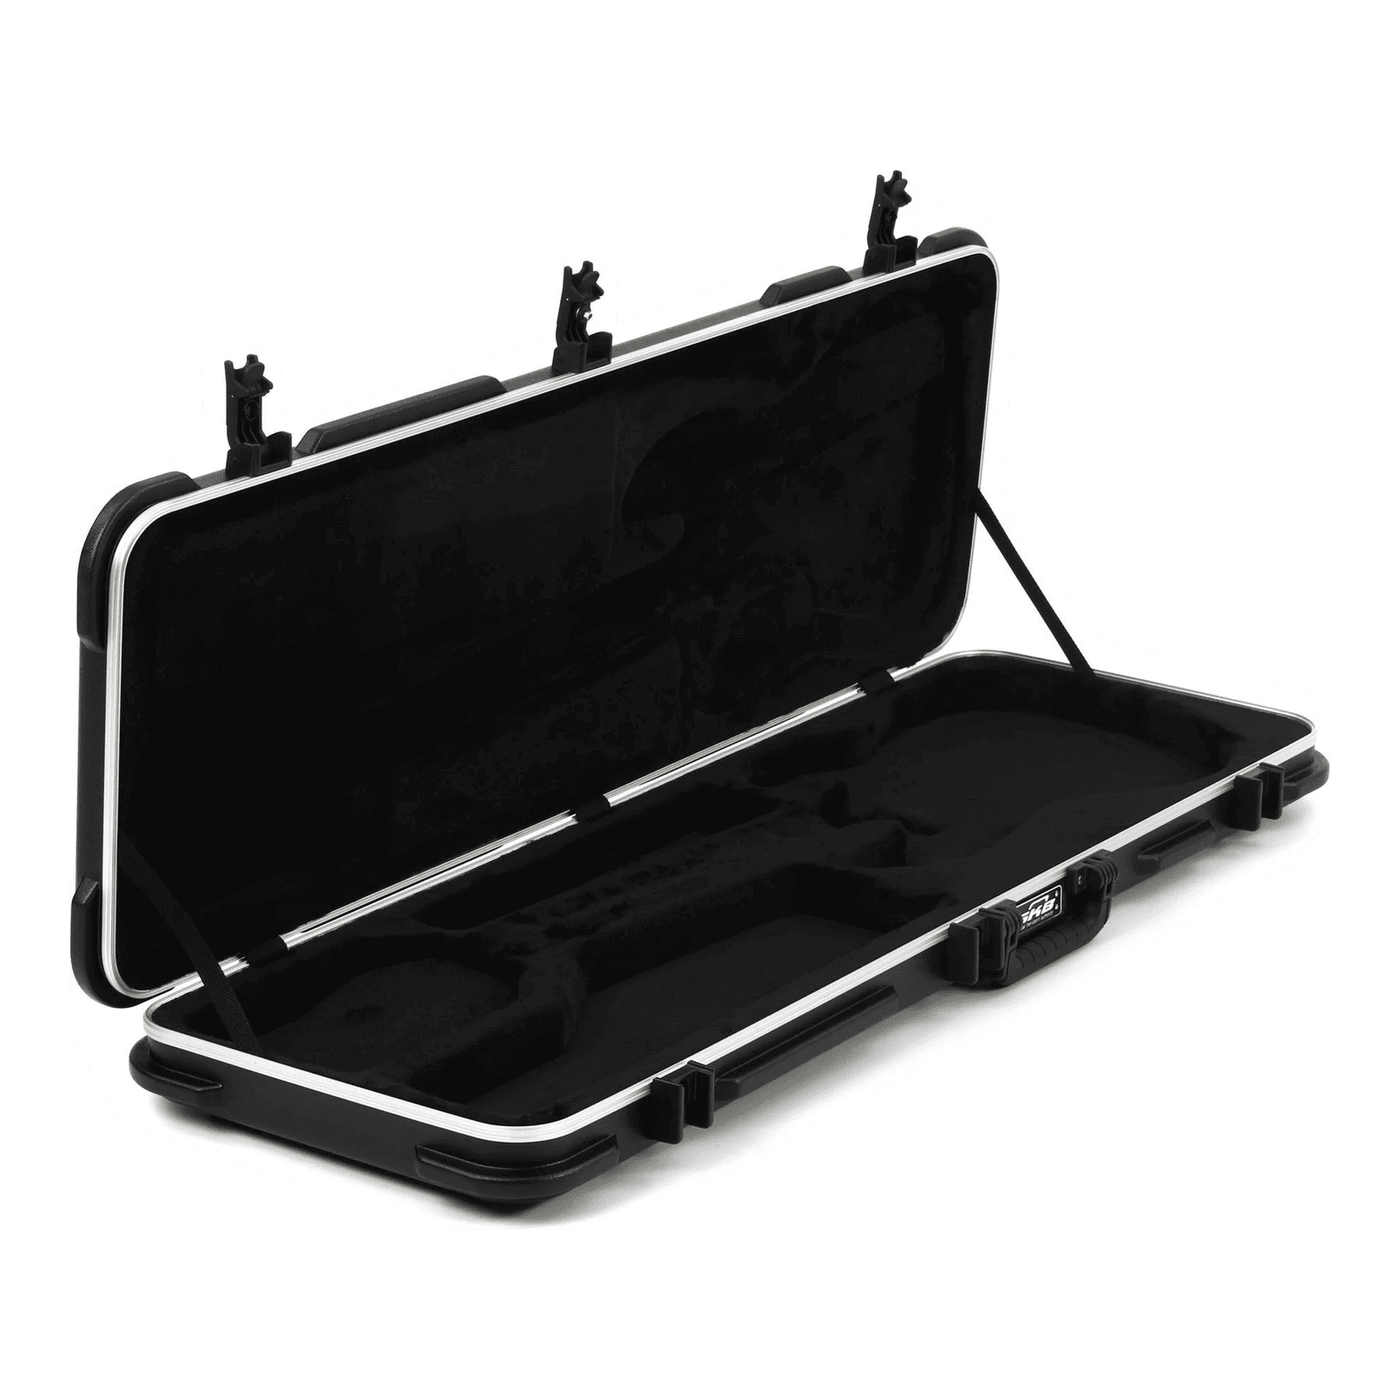 SKB Deluxe Electric Bass Rectangular Hardshell- TSA Latch - SKB began making guitar cases in California more than 30 years ago. Today, world-famous SKB bass cases set the standard for molded plastic transport protection. Bass players trust SKB cases to pr